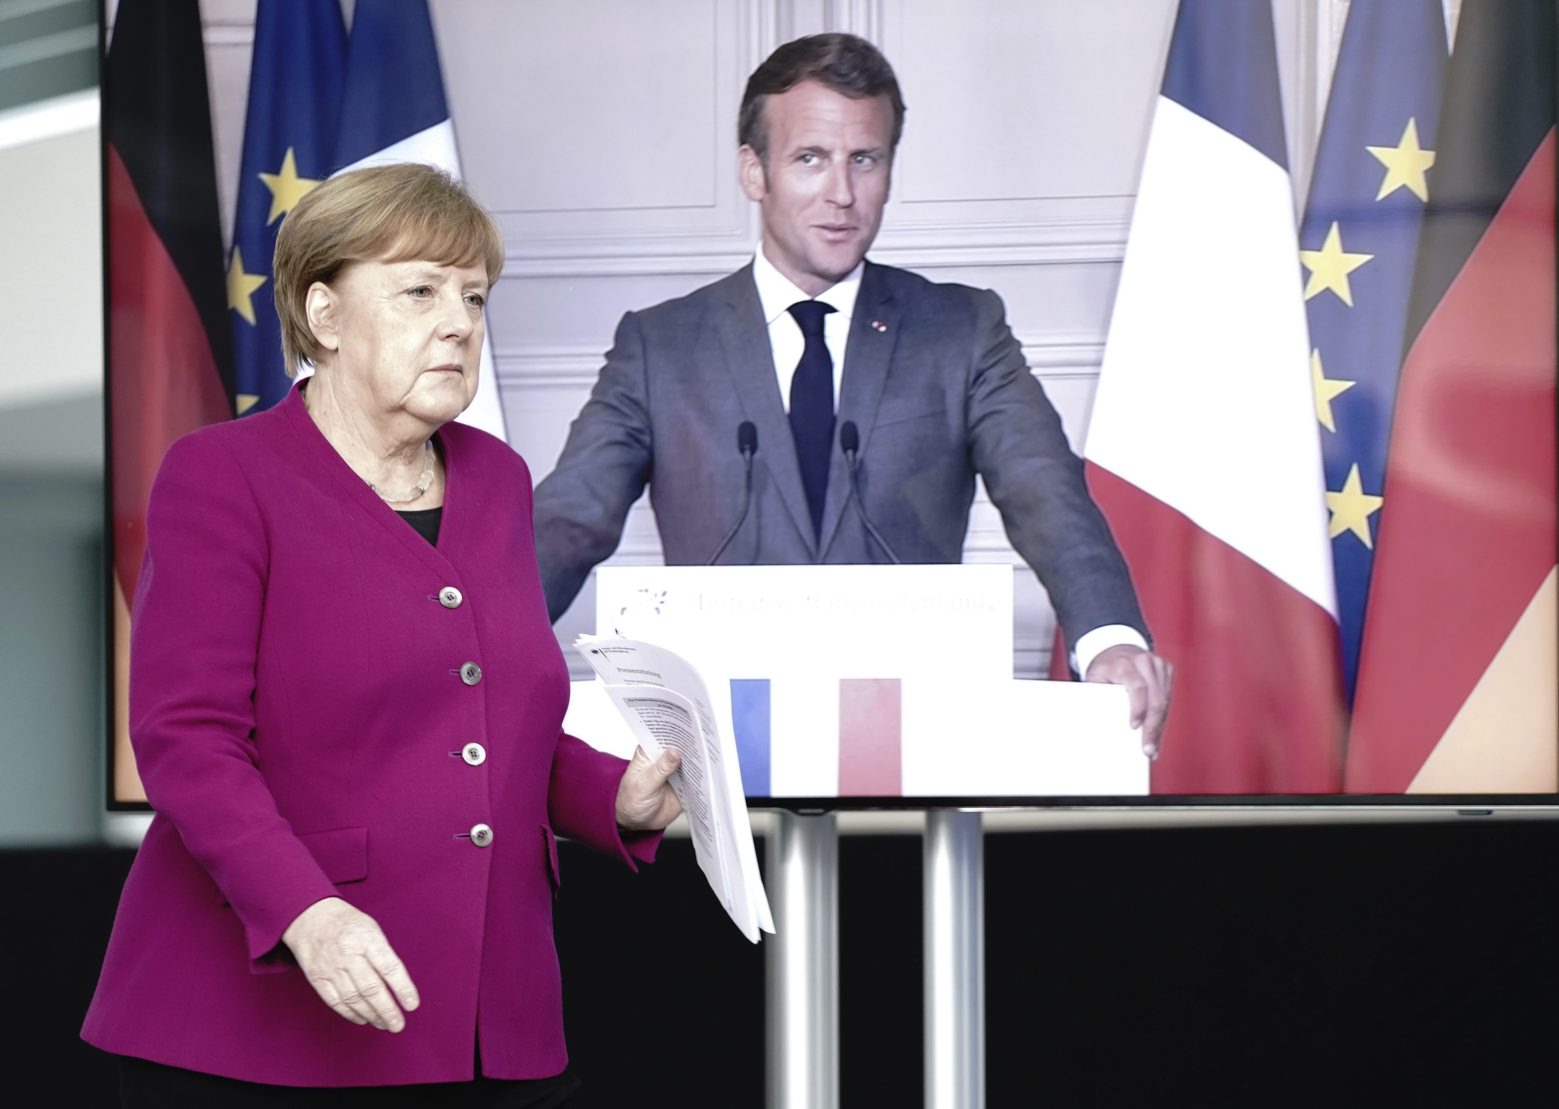 German Chancellor Angela Merkel arrives for a news conference with French President Emmanuel Macron, connected by video, after a joint video conference in Berlin, Germany, Monday, May 18, 2020. One topic was the corona pandemic and its consequences. (Kay Nietfeld/dpa via AP) Virus Outbreak Germany France